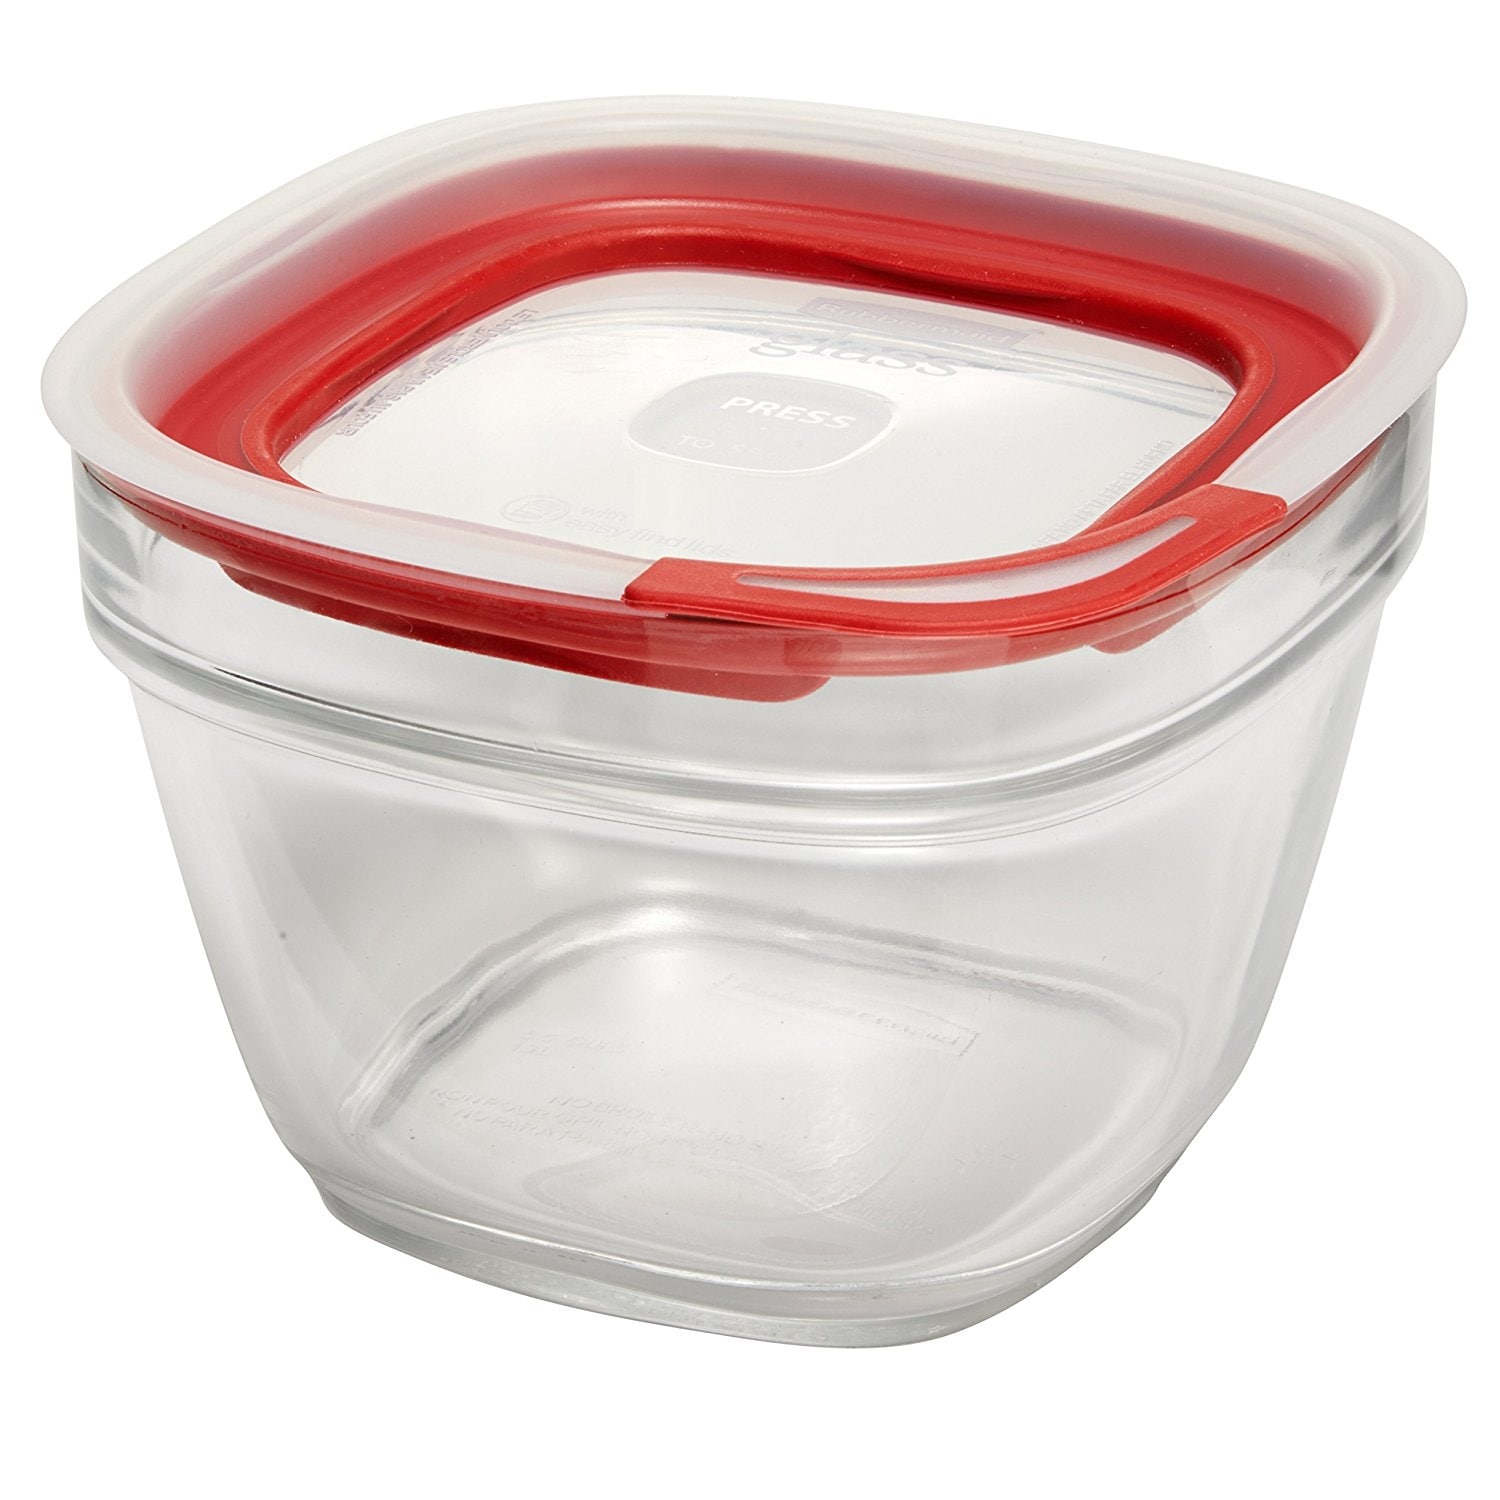 https://ak1.ostkcdn.com/images/products/is/images/direct/8c6ec5e06374c538bec17af6e783aa2997084abe/Rubbermaid-2856005-Easy-Find-Lid-Glass-Food-Storage-Container%2C-5.5-Cup%2C-Square.jpg